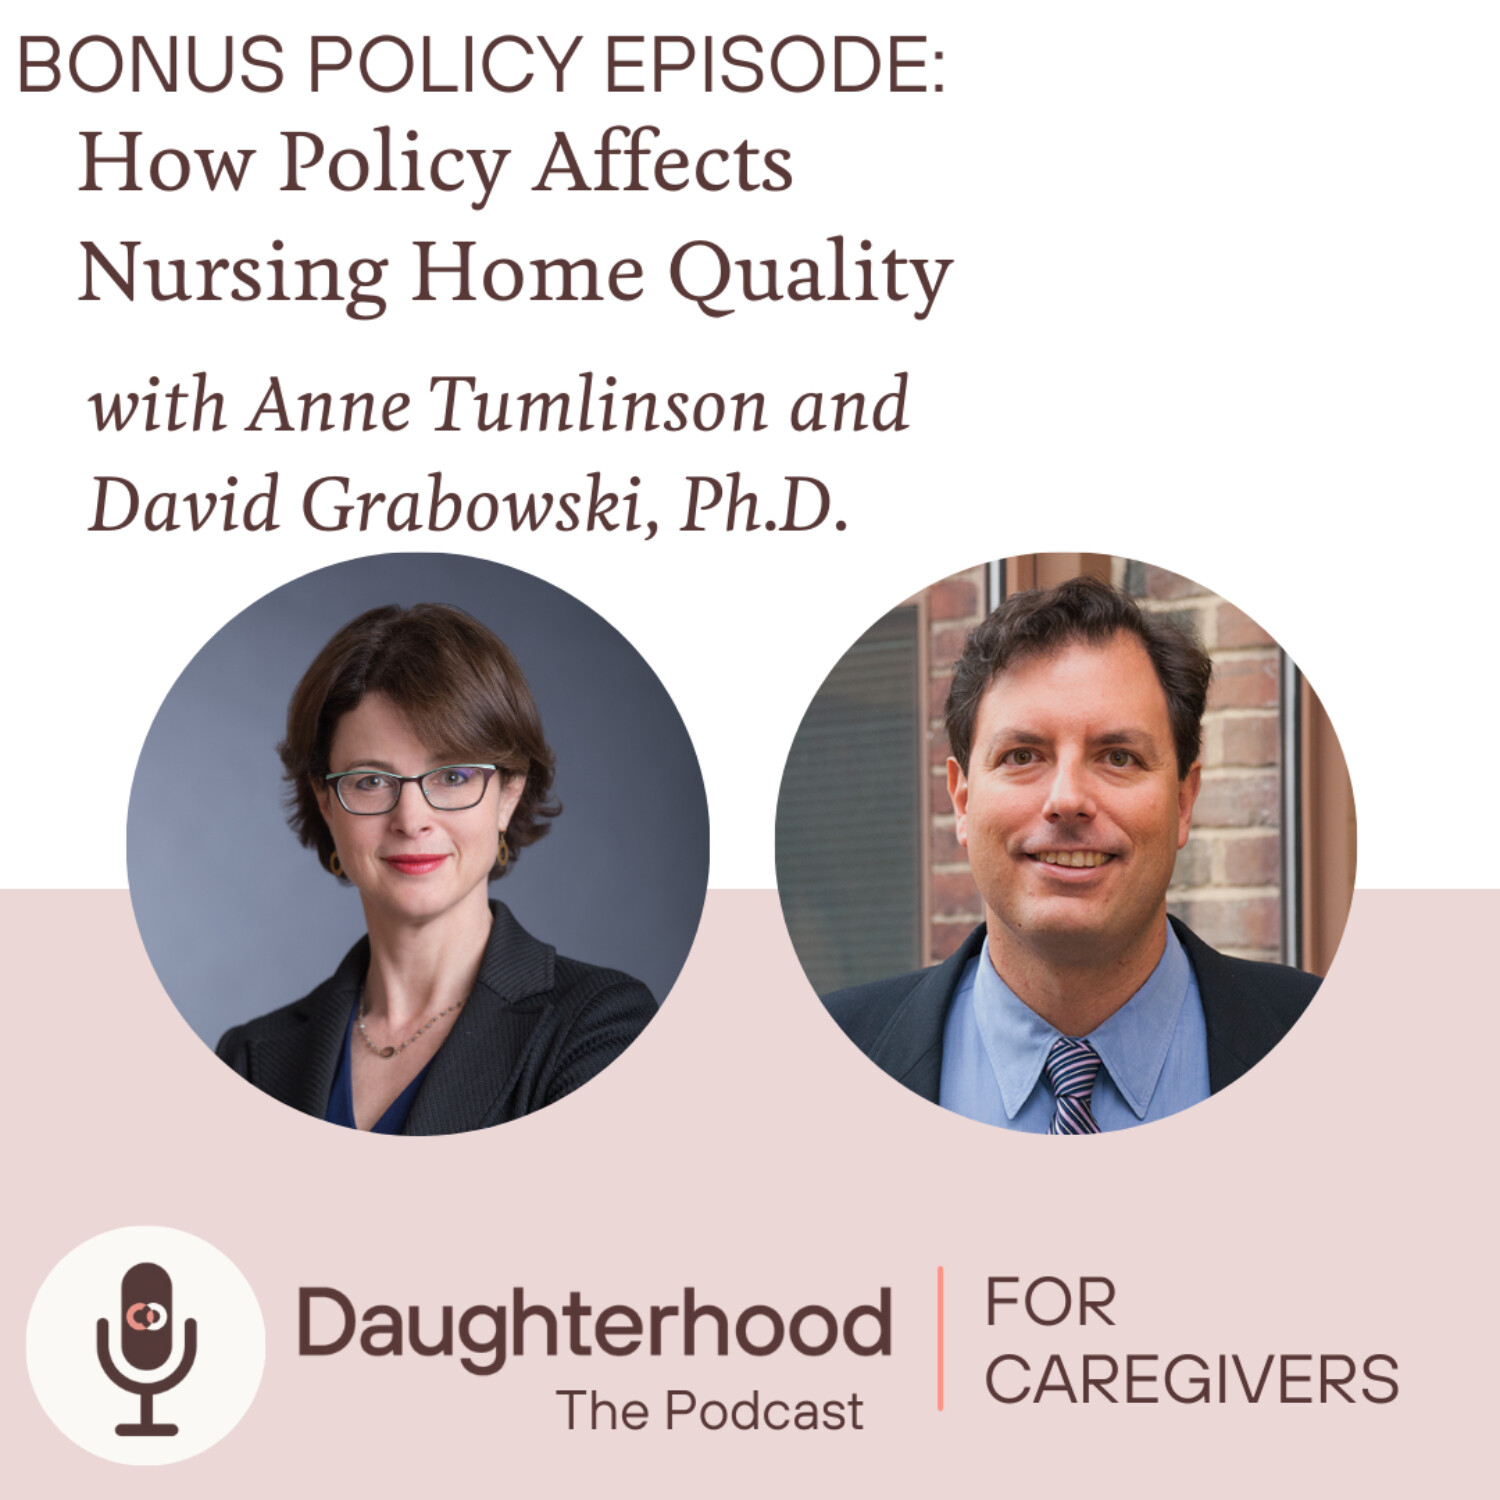 BONUS – How Policy Affects Nursing Home Quality with Anne Tumlinson and David Grabowski, Ph.D.